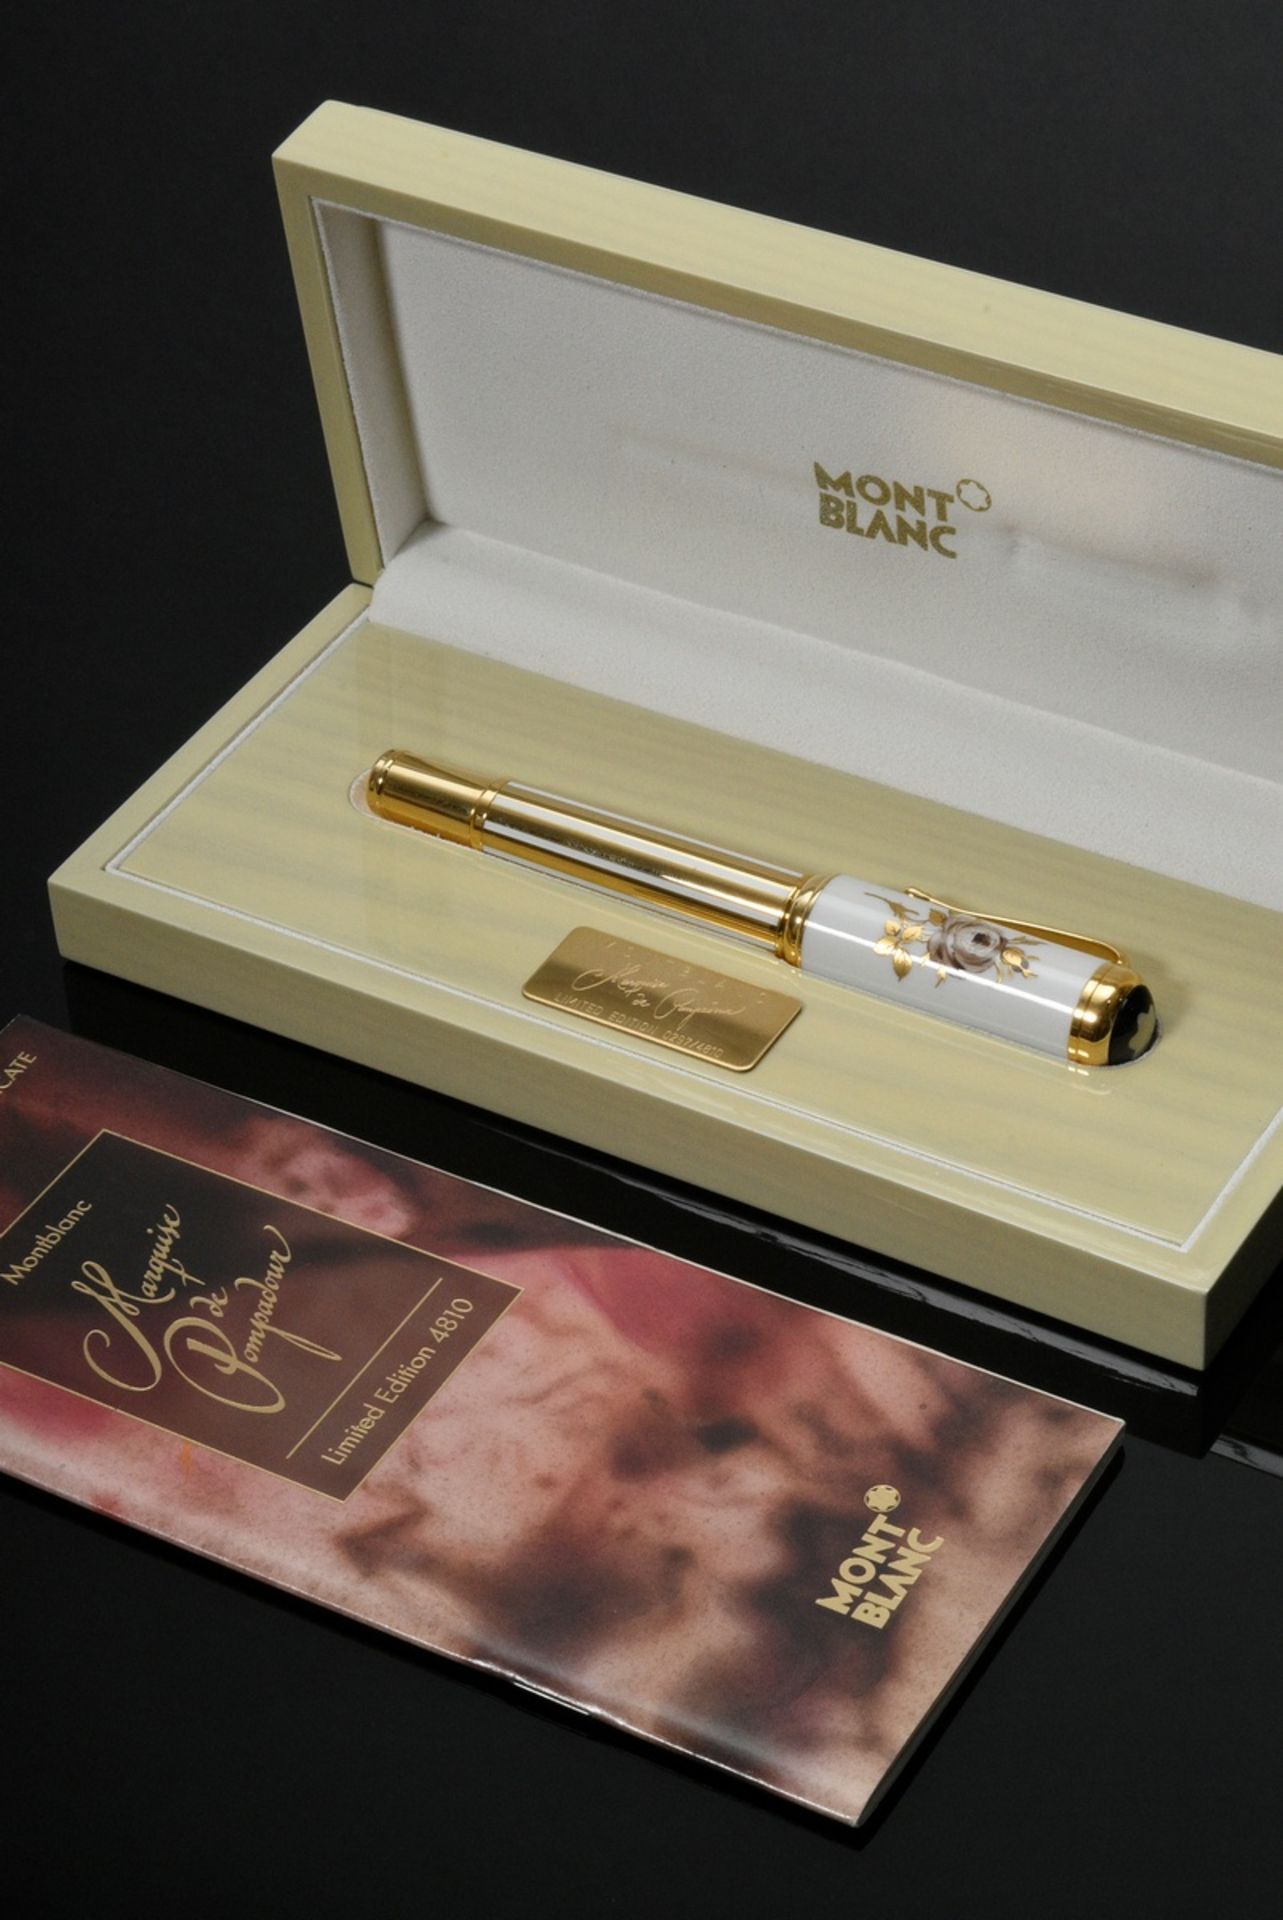 Montblanc piston fountain pen "Marquise de Pompadour" from the special edition "Patron of Art", gol - Image 2 of 7